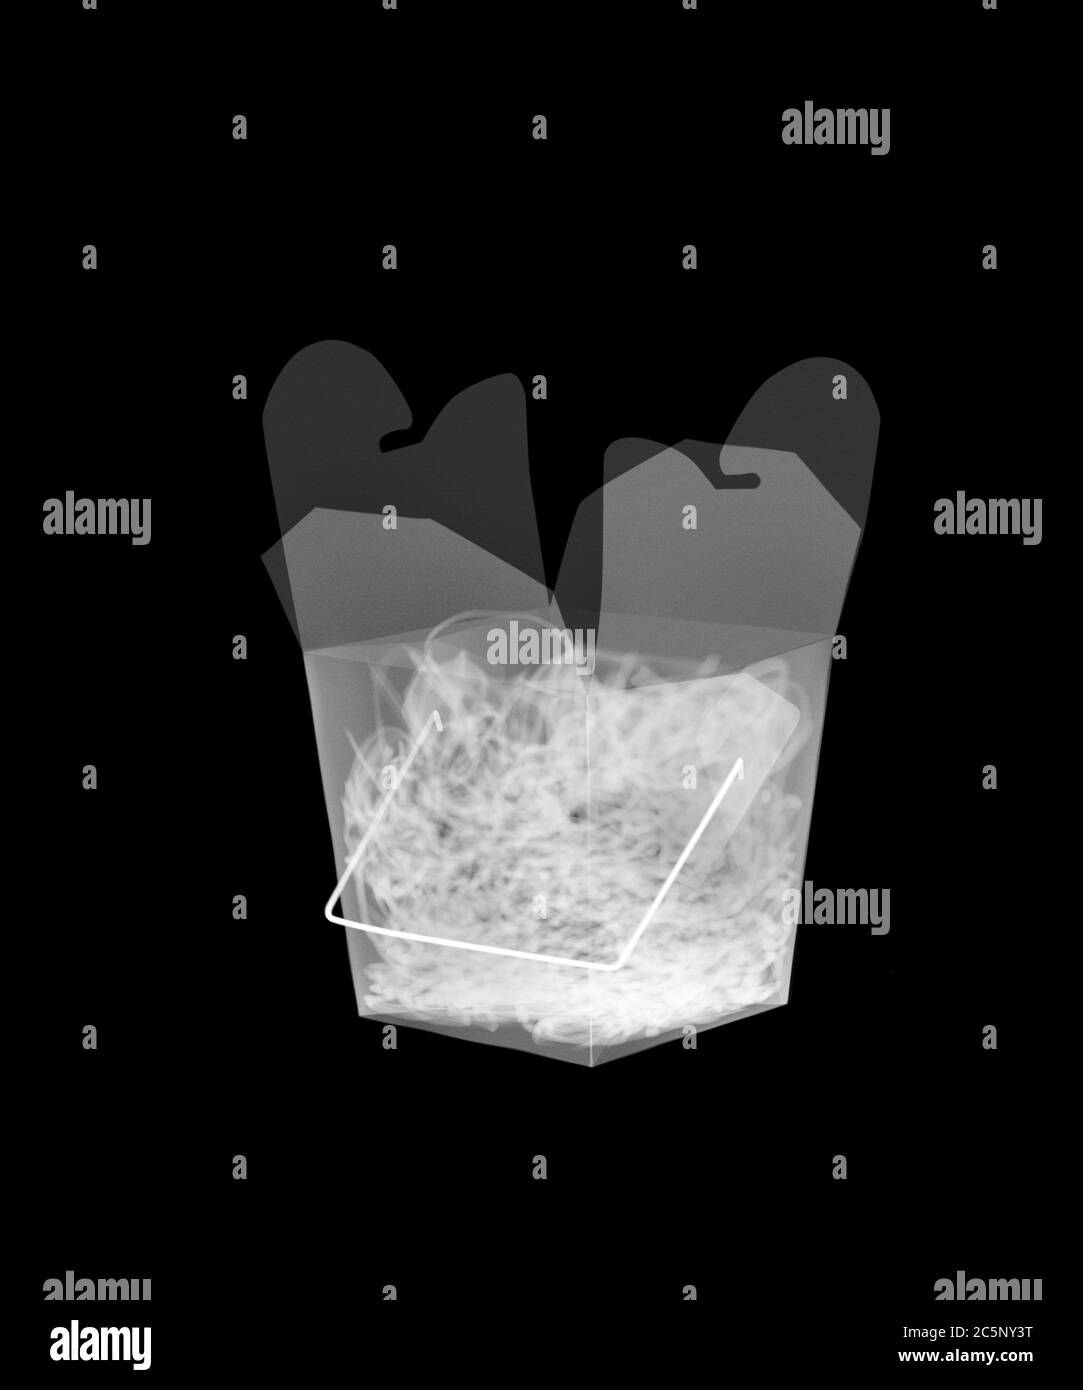 Chinese takeaway noodles, X-ray. Stock Photo